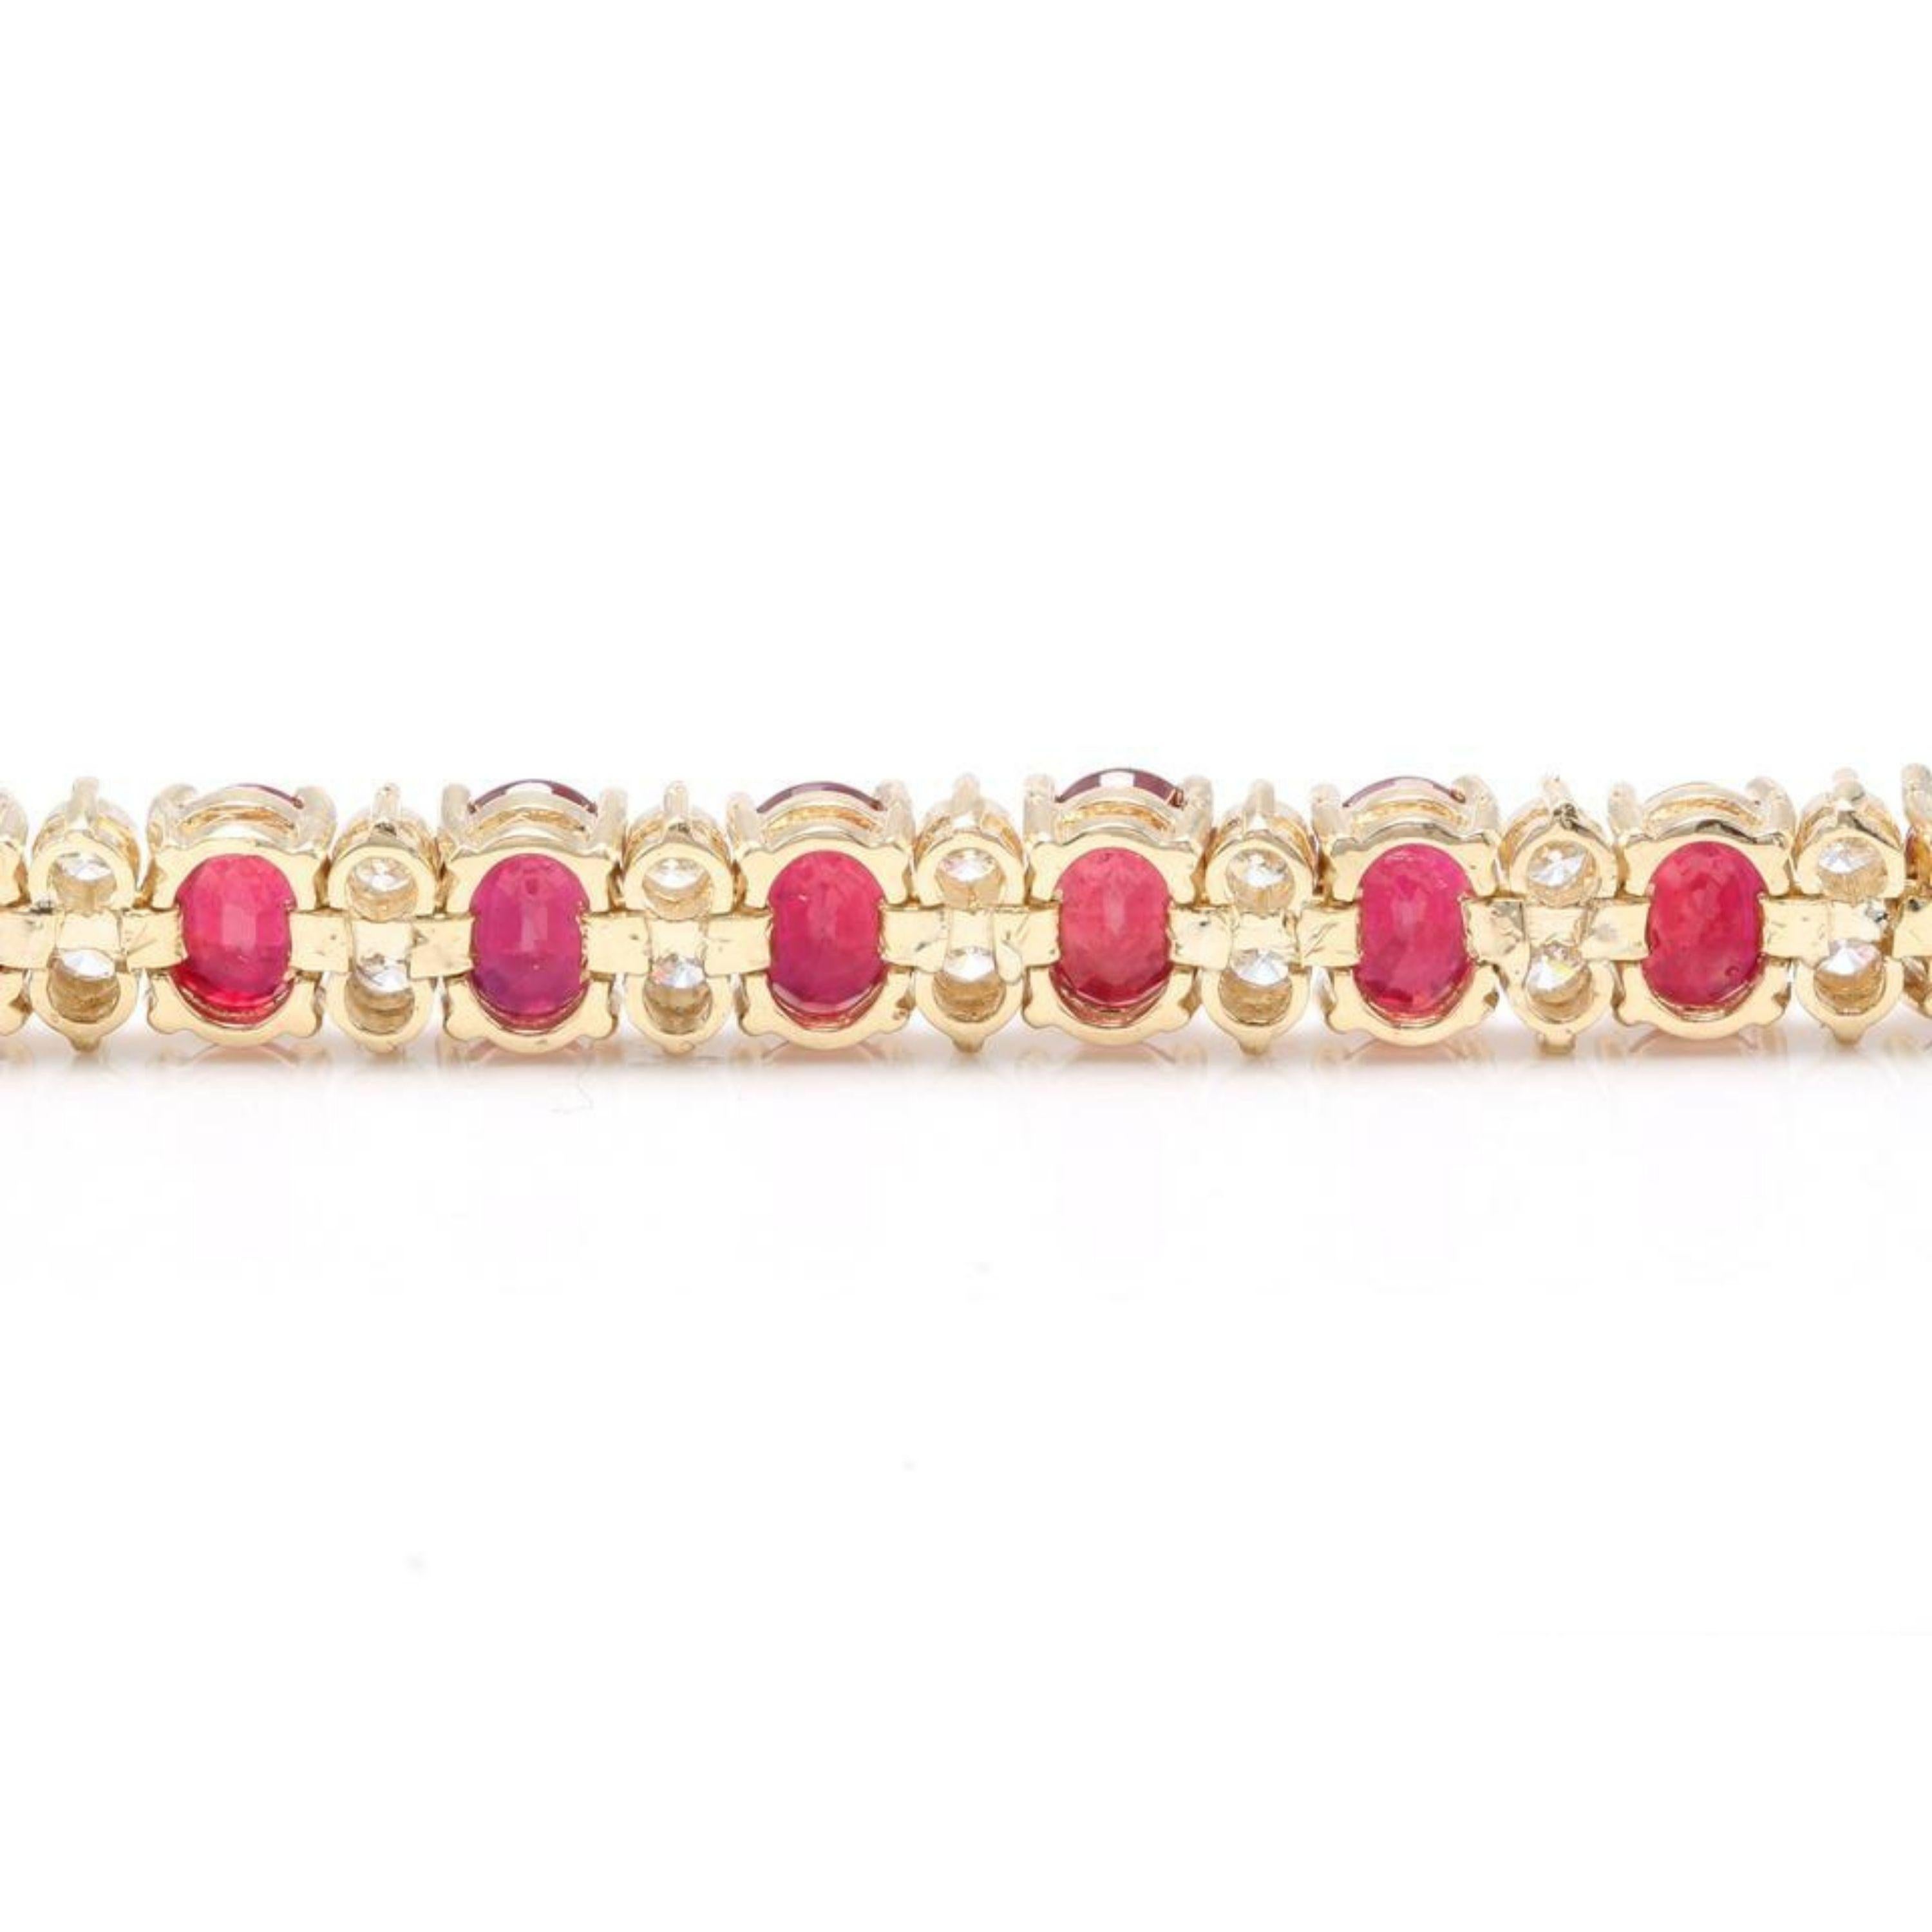 Very Beautiful 29.80 Carat Ruby and Natural Diamond 14 Karat Solid Gold Bracelet For Sale 1